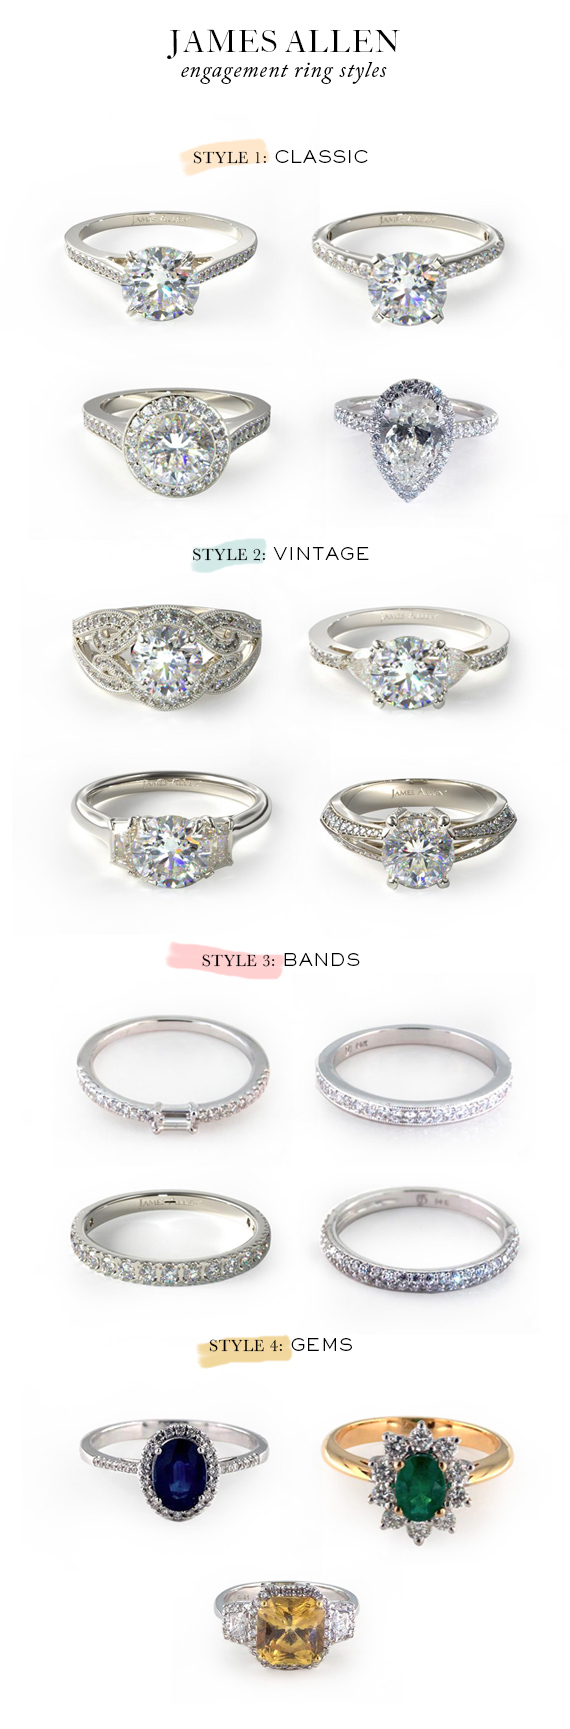 James Allen engagement rings | 100 Layer Cake